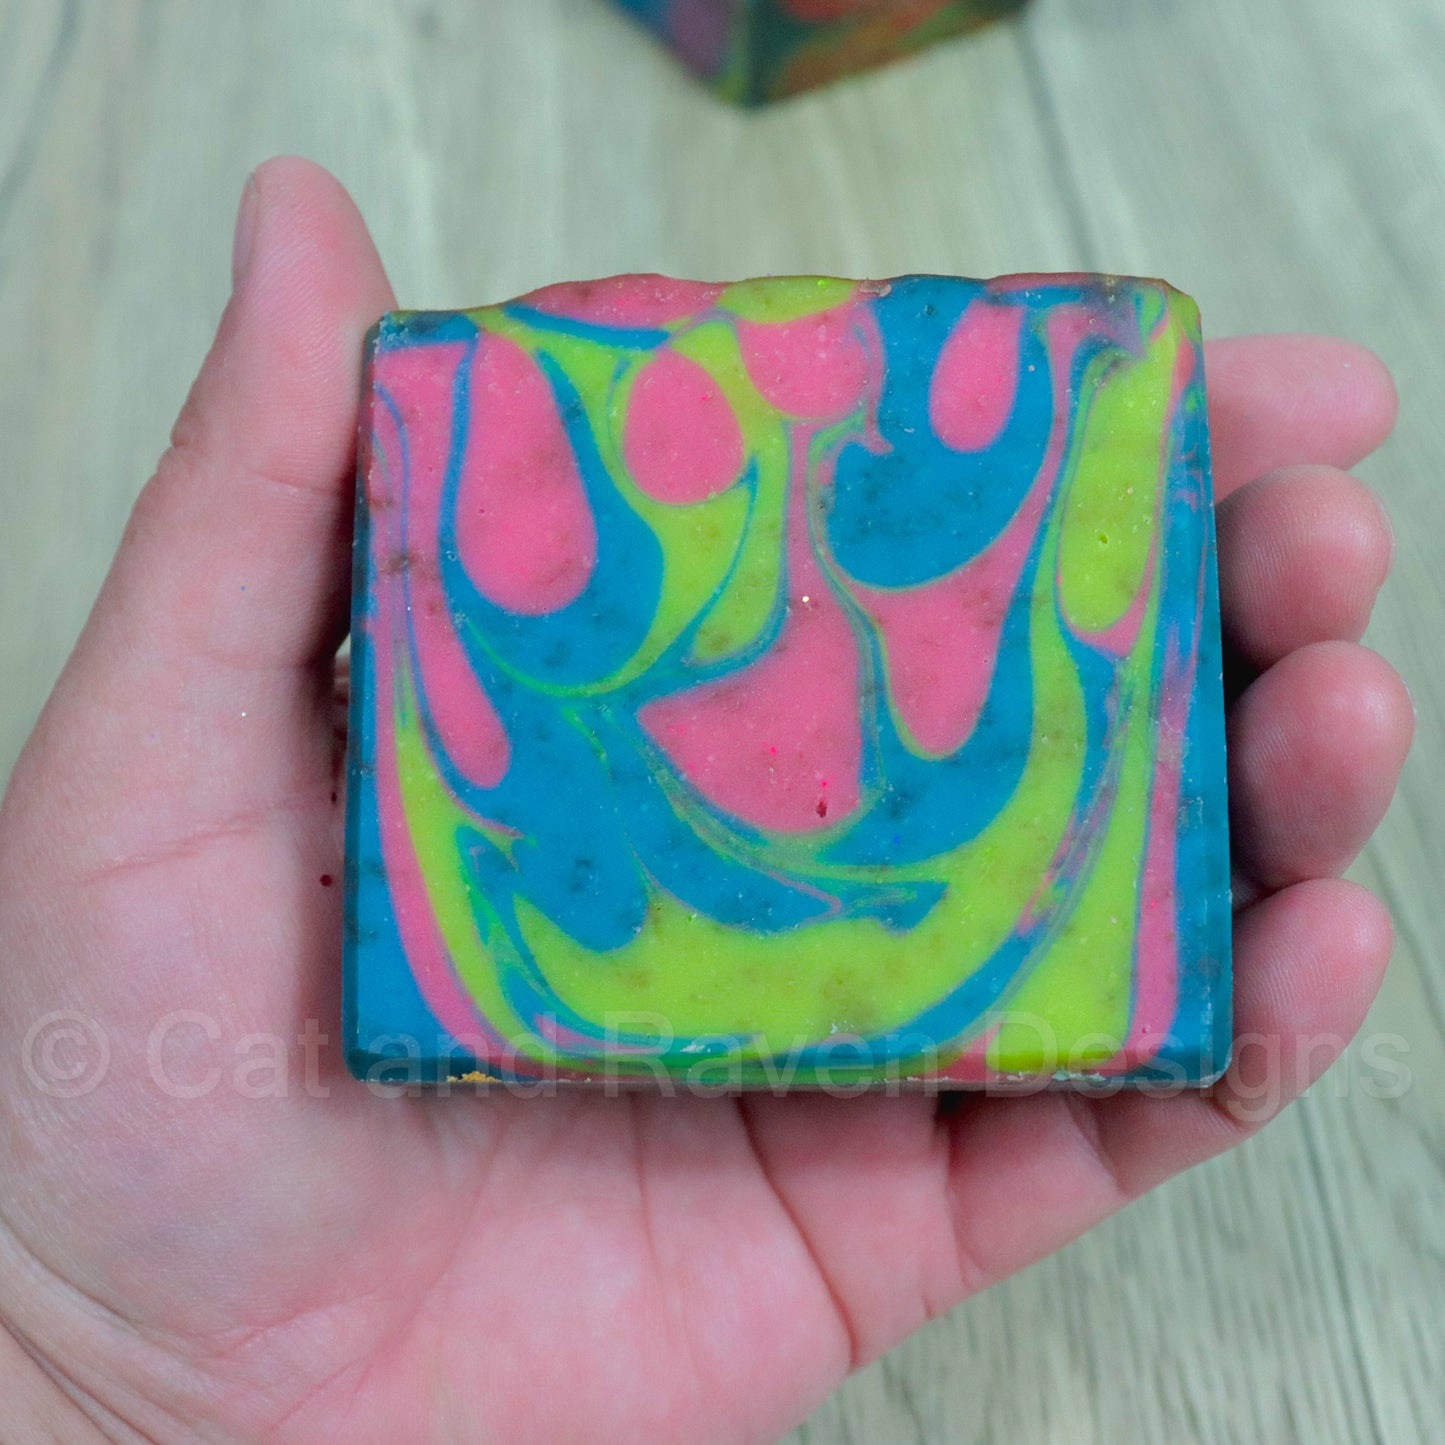 Lions, Tigers, and Bears! soap